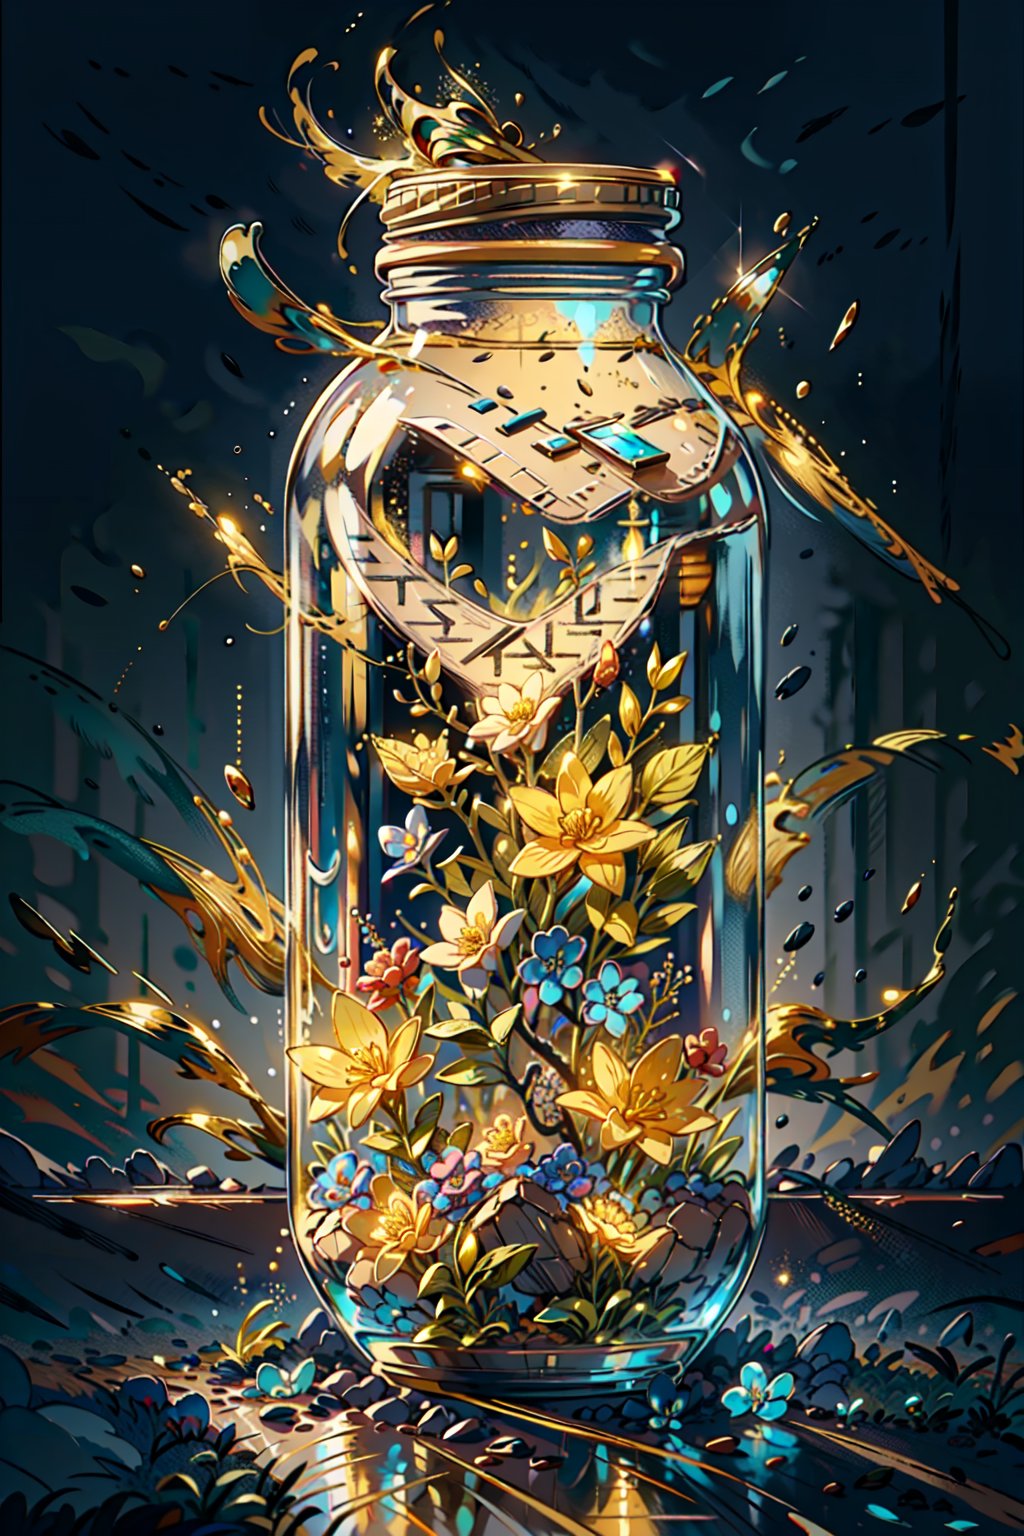 Highres, best quality, extremely detailed, area lighting in background, HD, 8k, extremely intricate:1.3), 1 girl, realistic, SMALL BODY, CUTE, GlowingRunes_yellow, stomach, elf, fairies, phgls, in container, Transparent colorless vaze, colorful flowers, warm colors, softly painted, very dark background, impressionistic, abstract, 